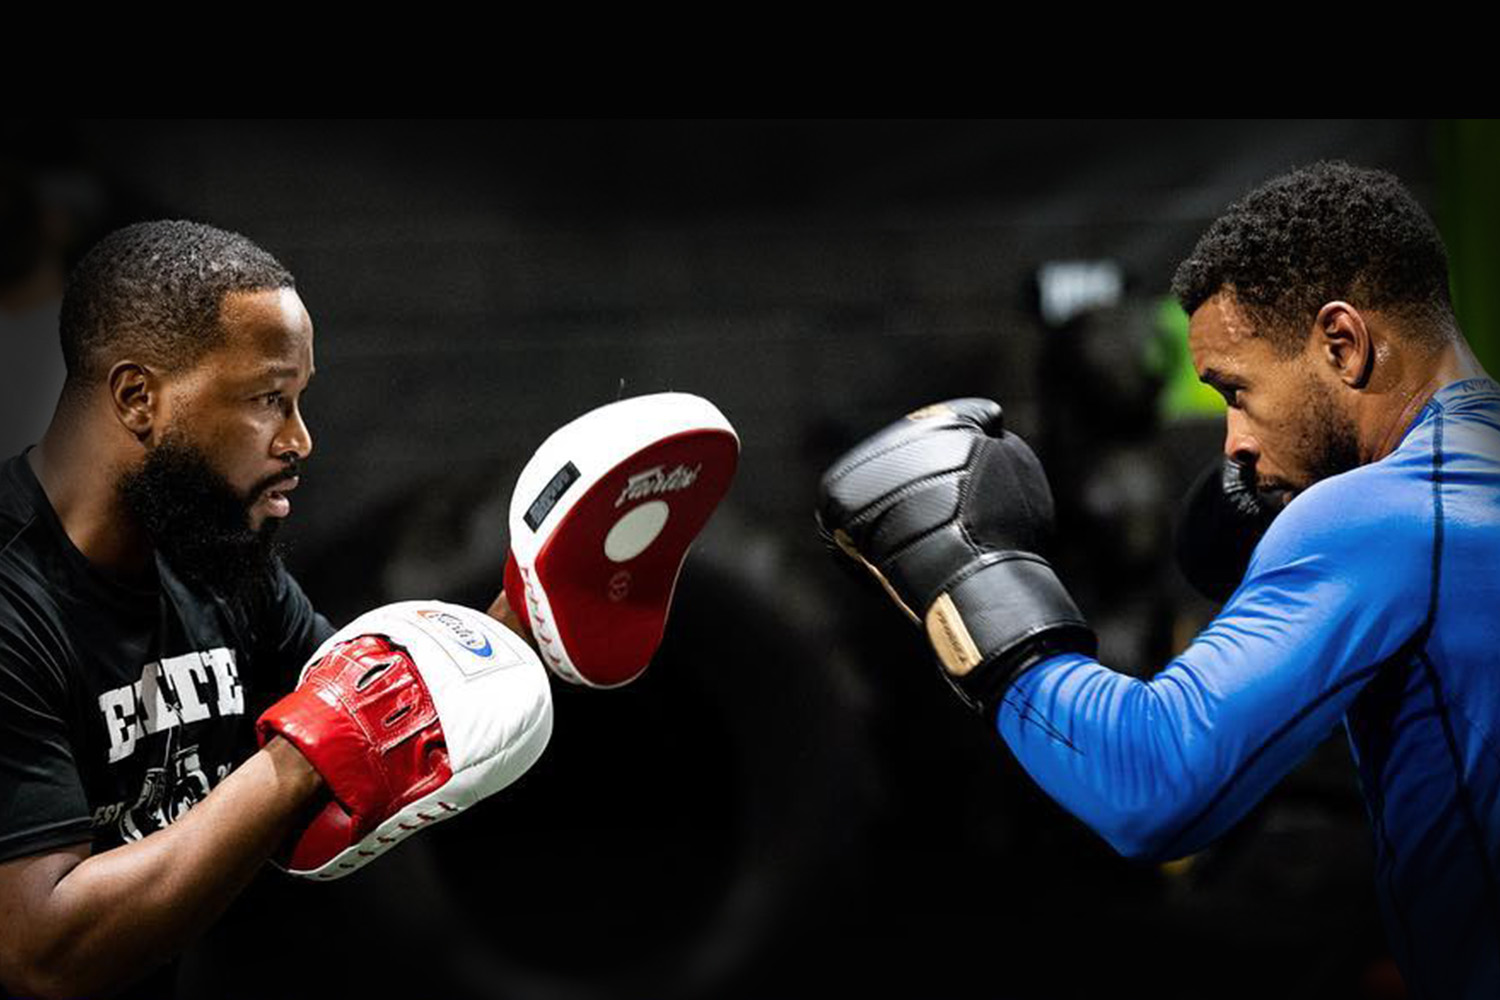 Boxing Classes in Columbia, Baltimore, Ellicott City at Elite Boxing & Fitness Gym